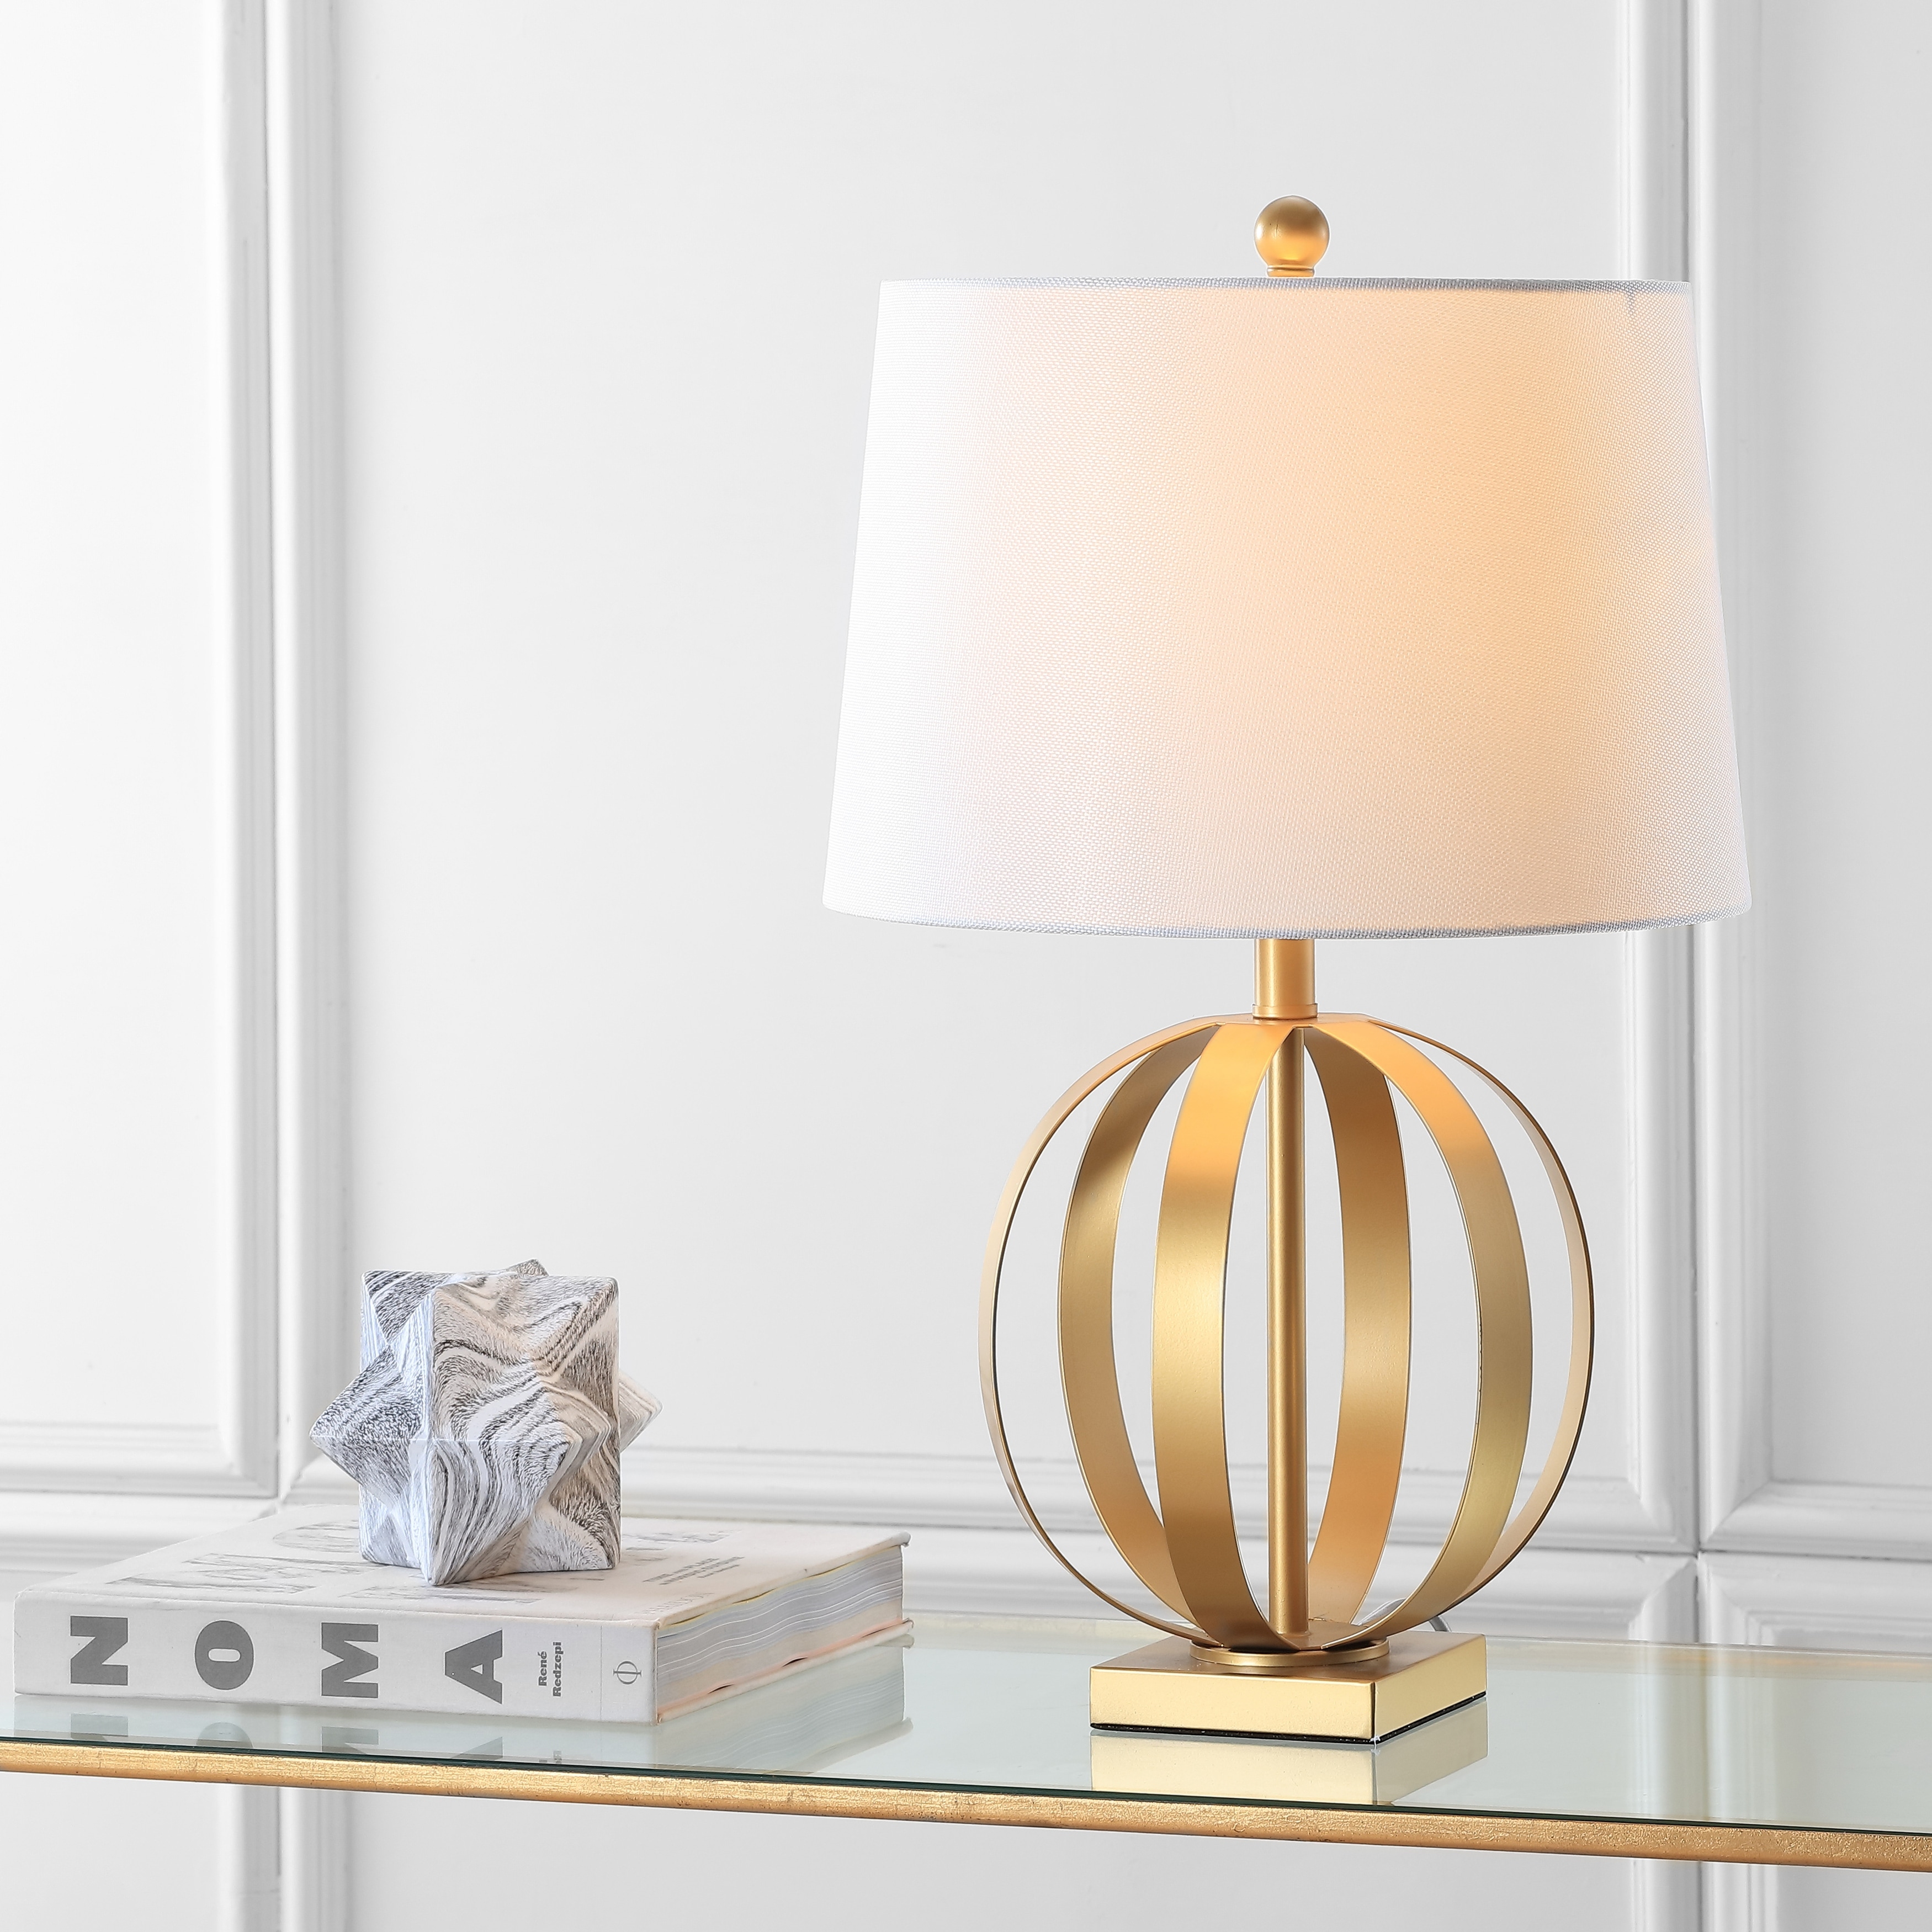 Details about   Safavieh Lighting Collection Alexis Gold Bead 19-Inch Table Lamp 